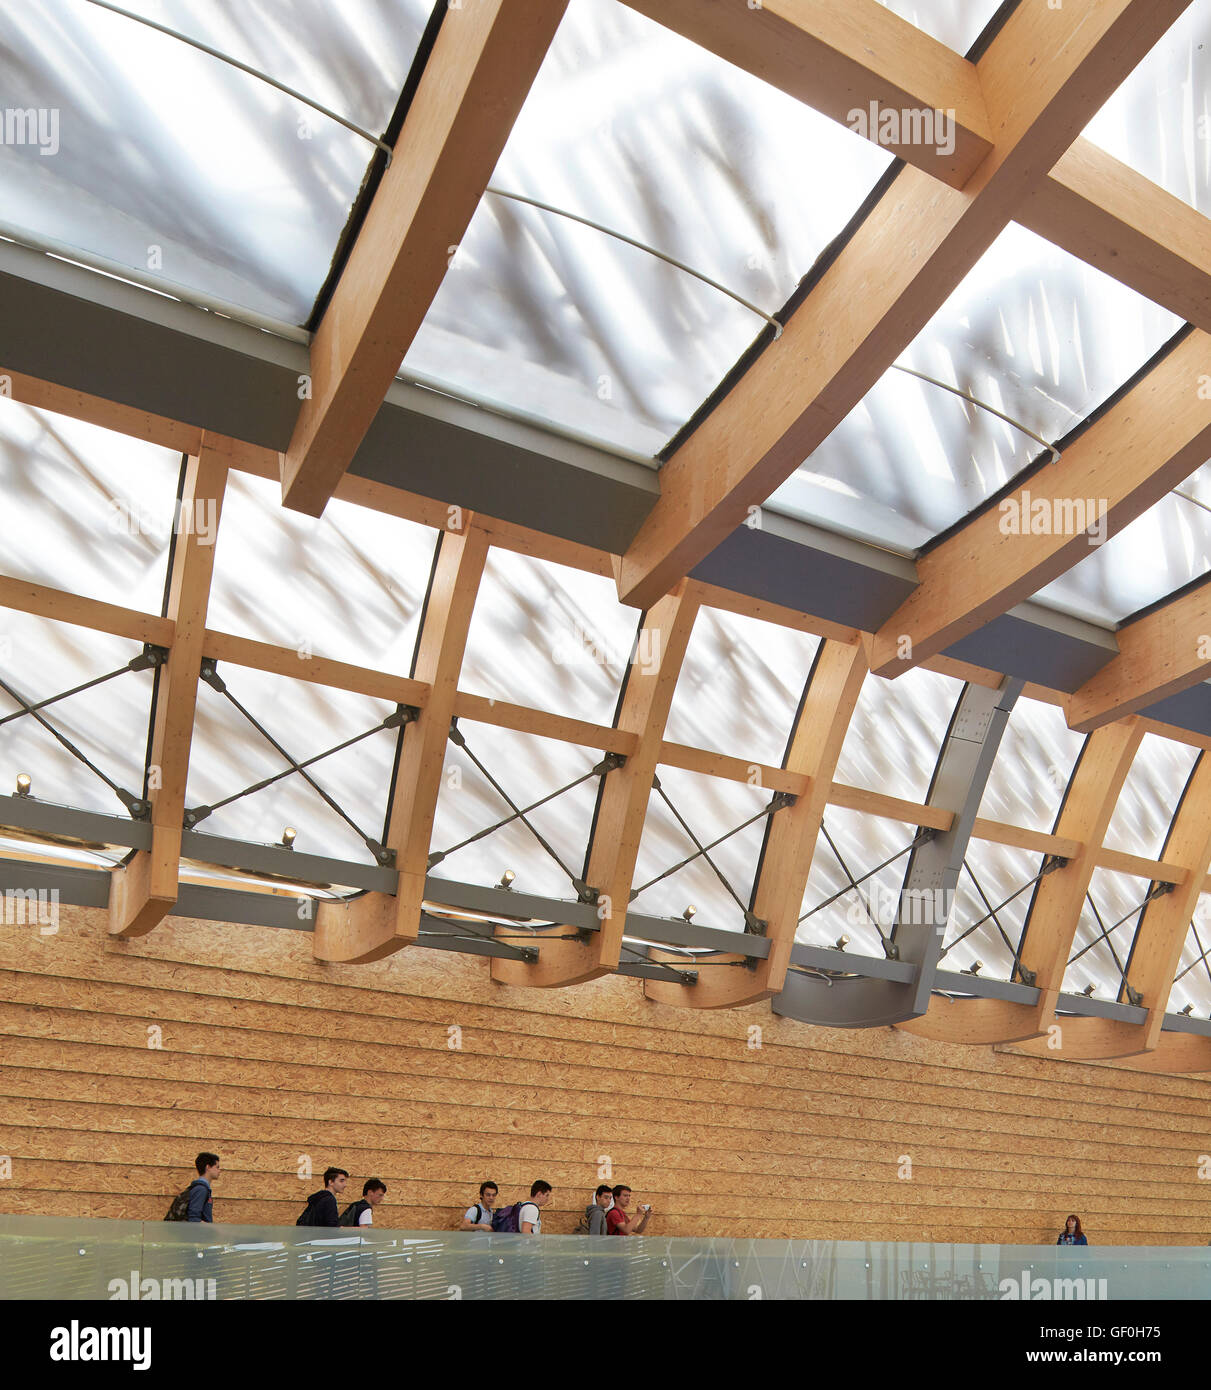 Details of timber frame structure. Milan EXPO 2015, China Pavilion, Milan, Italy. Architect: Studio Link-Arc with Tsinghua University, 2015. Stock Photo